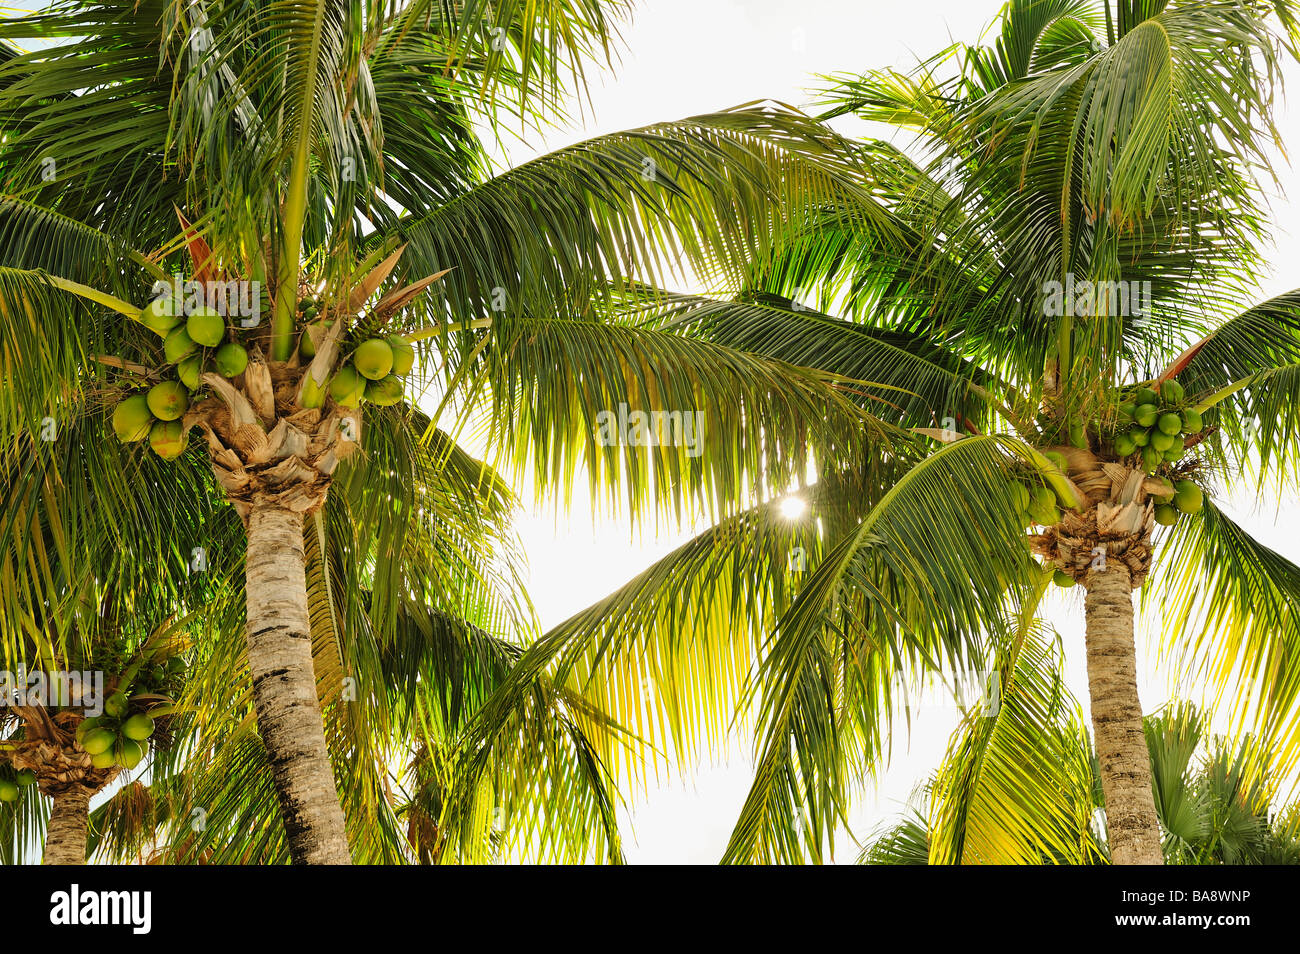 Coconuts in palm trees Stock Photo